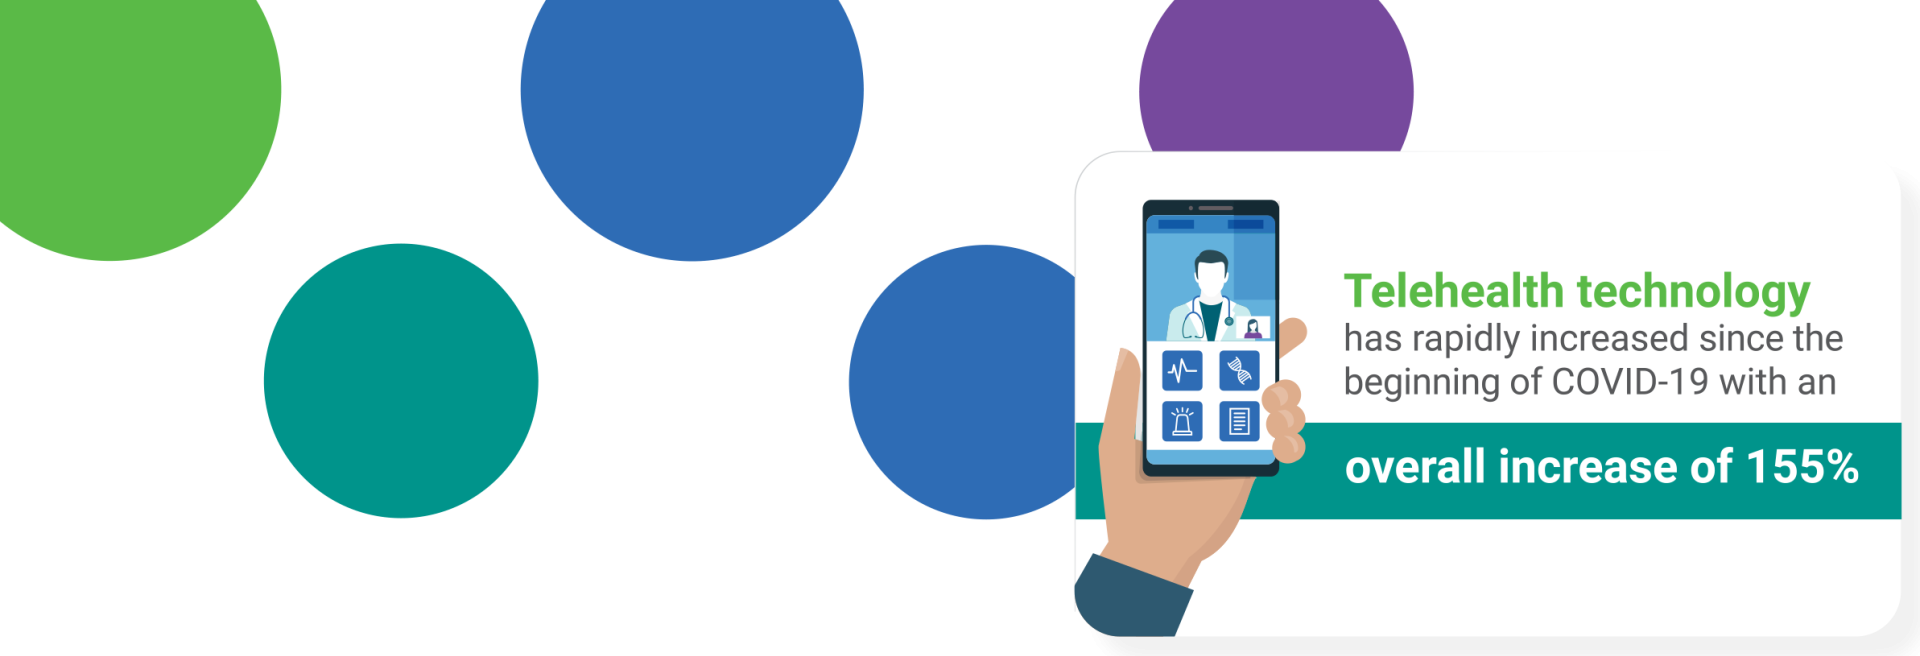 Telehealth technology has rapidly increased since the beginning of COVID-19 with an overall increase of 155%